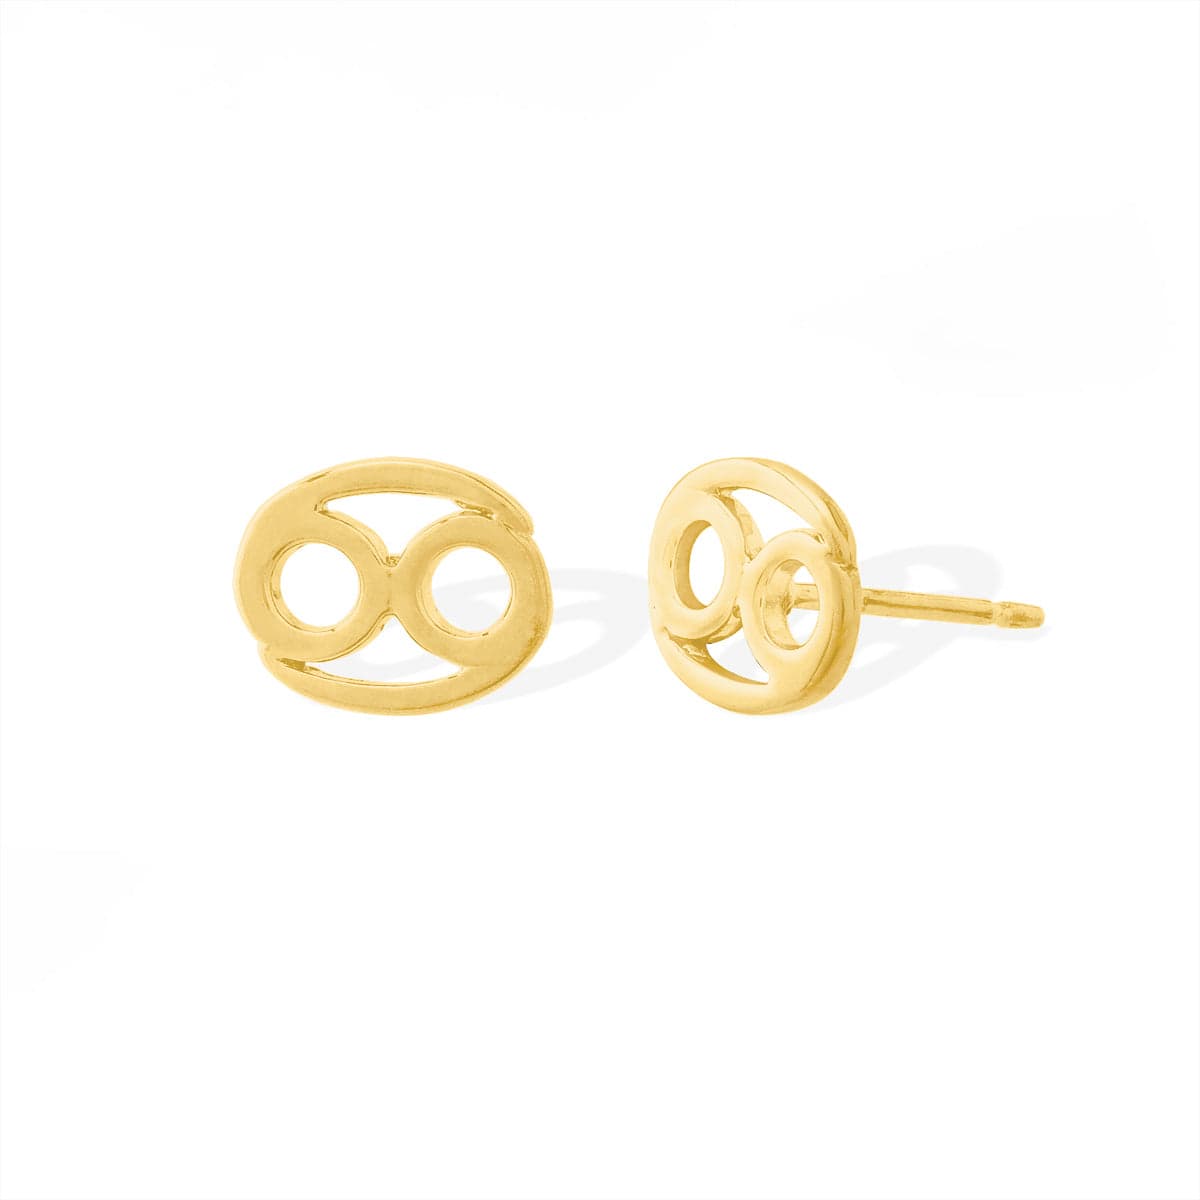 Boma Jewelry Earrings 14K Gold Plated / Cancer Zodiac Studs